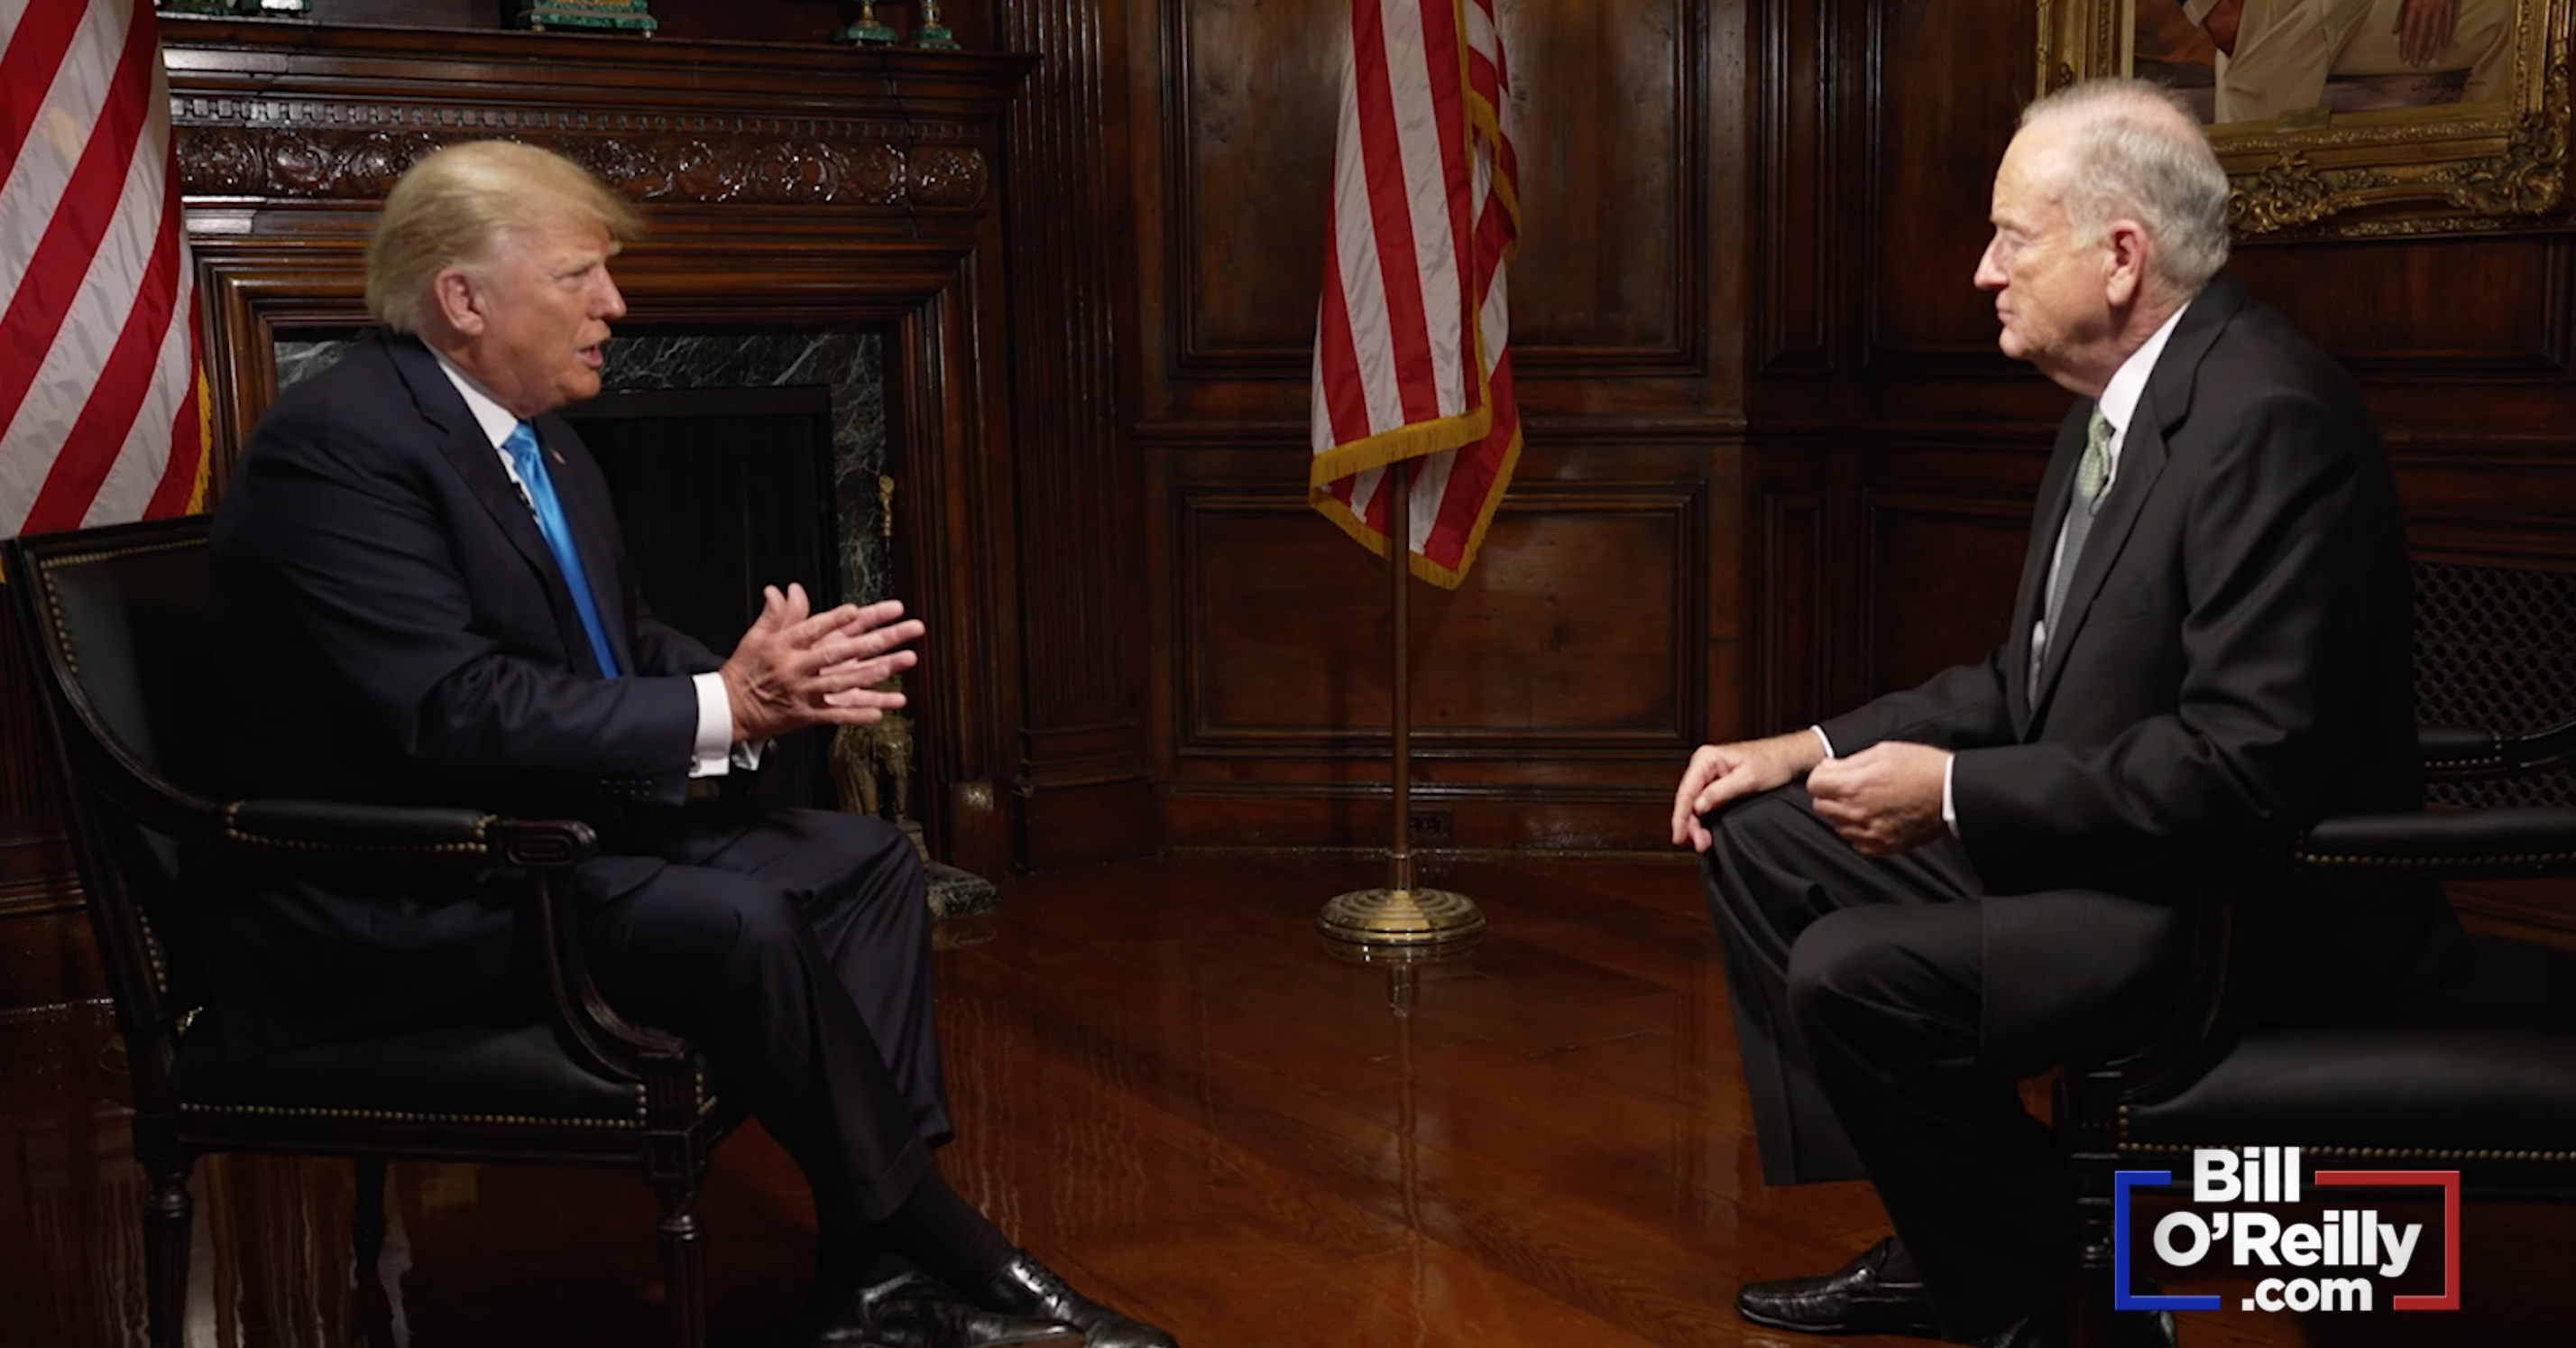 WATCH: Trump and O'Reilly Discuss the Border and Vaccine